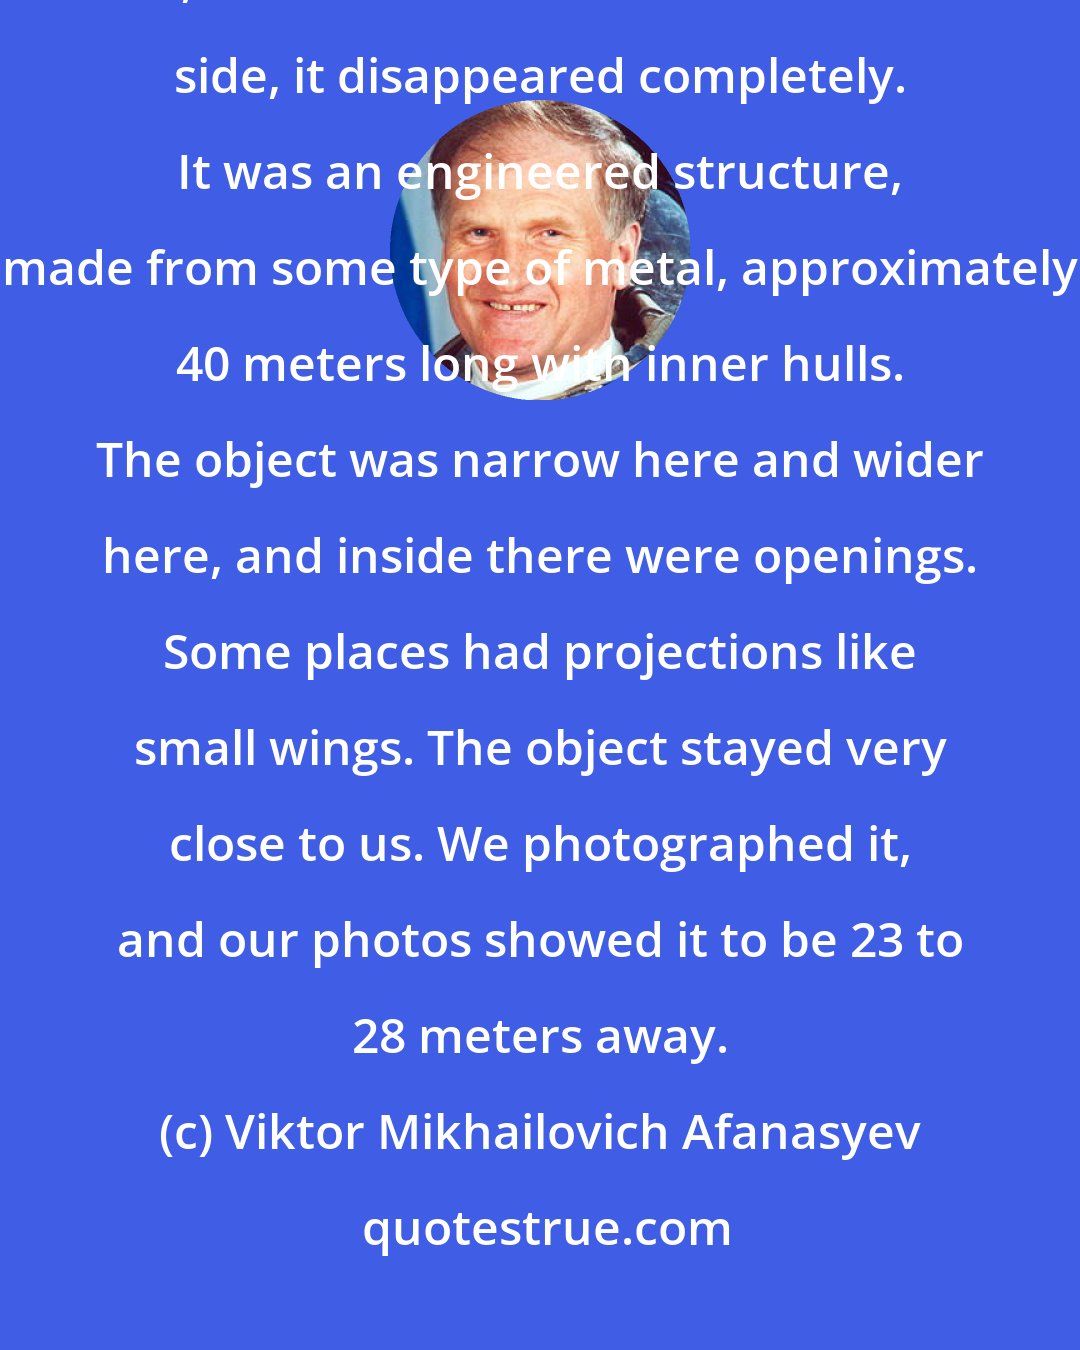 Viktor Mikhailovich Afanasyev: It followed us during half of our orbit. We observed it on the light side, and when we entered the shadow side, it disappeared completely. It was an engineered structure, made from some type of metal, approximately 40 meters long with inner hulls. The object was narrow here and wider here, and inside there were openings. Some places had projections like small wings. The object stayed very close to us. We photographed it, and our photos showed it to be 23 to 28 meters away.